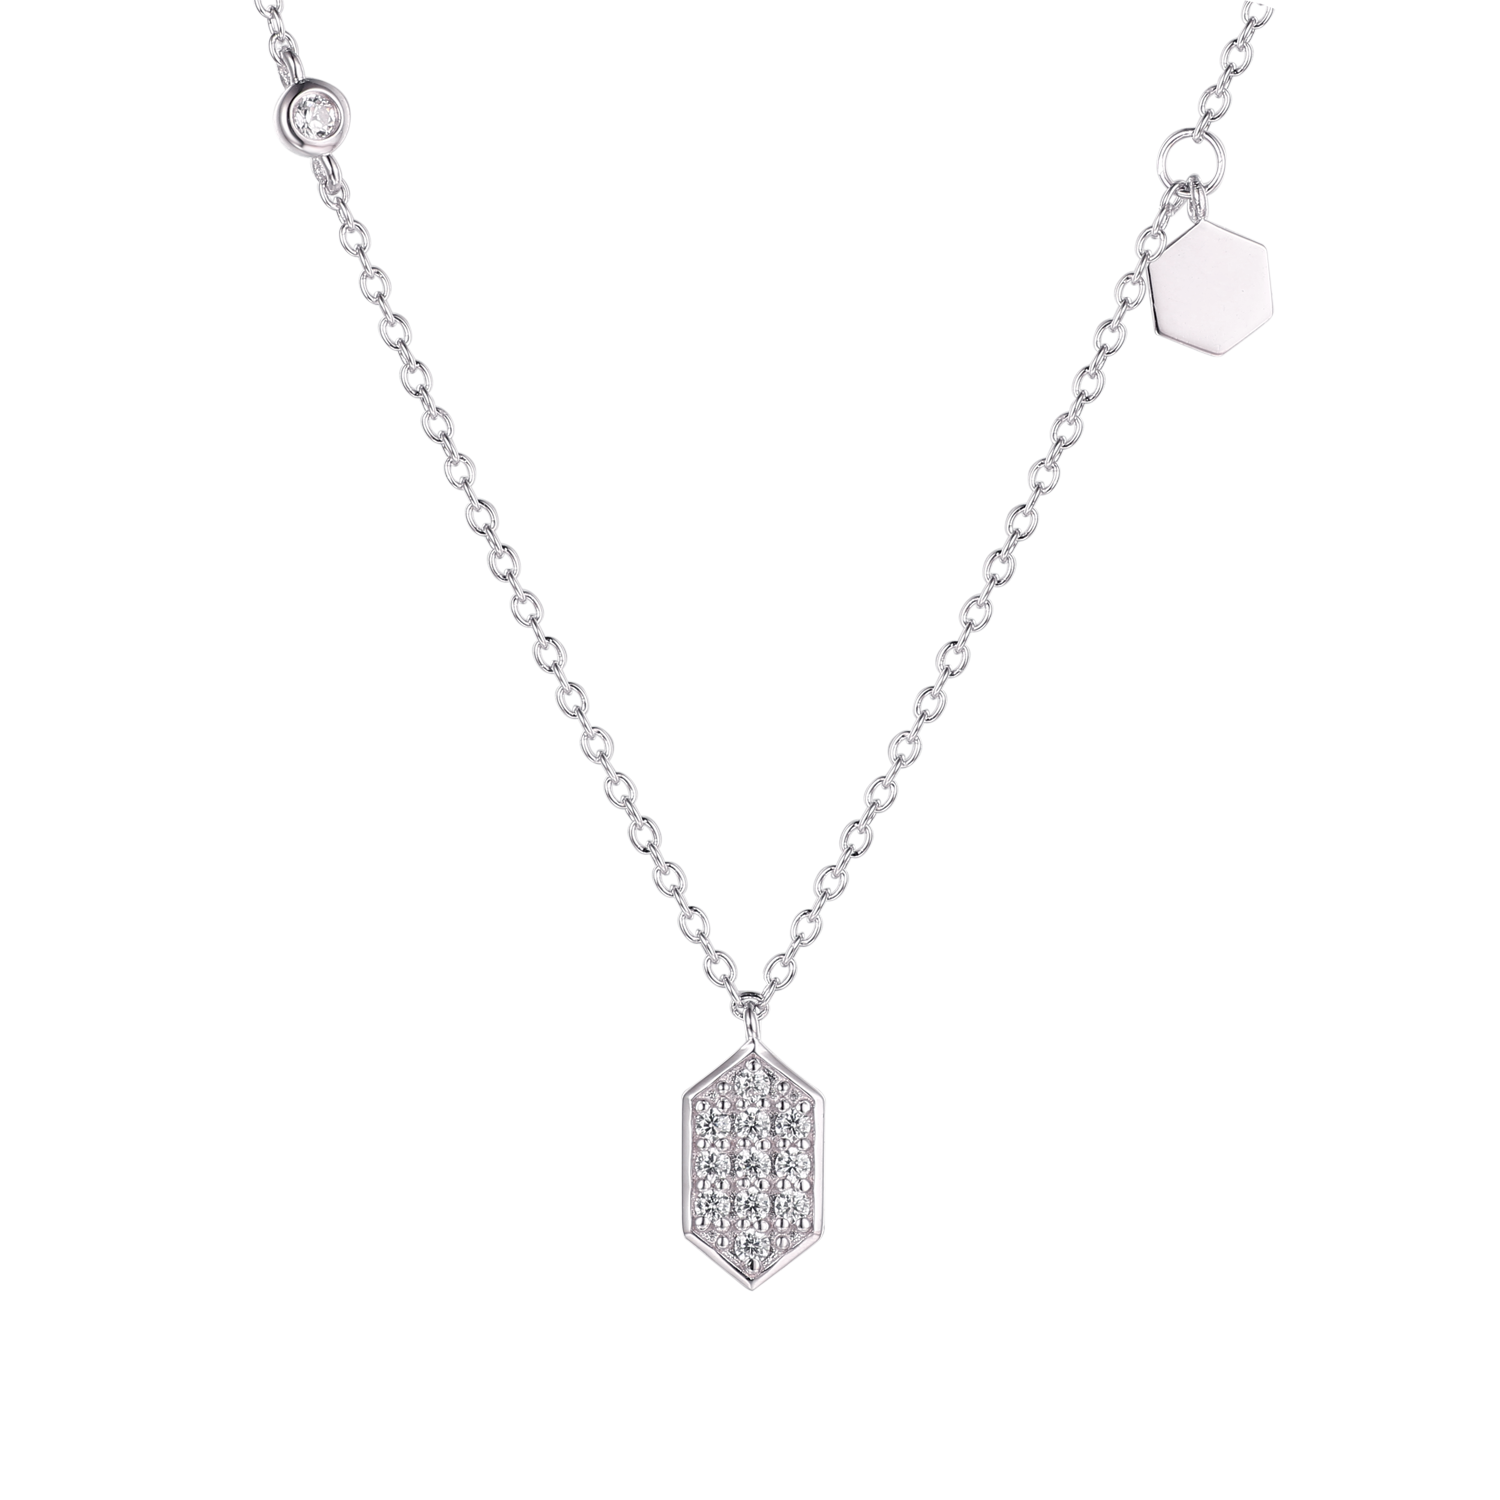 Joacii 925 Sterling Silver Initial Crystal Zircon Stones Polished Hexagonal Hexagon Pendant Necklace With Joias Banhadas A Ouro